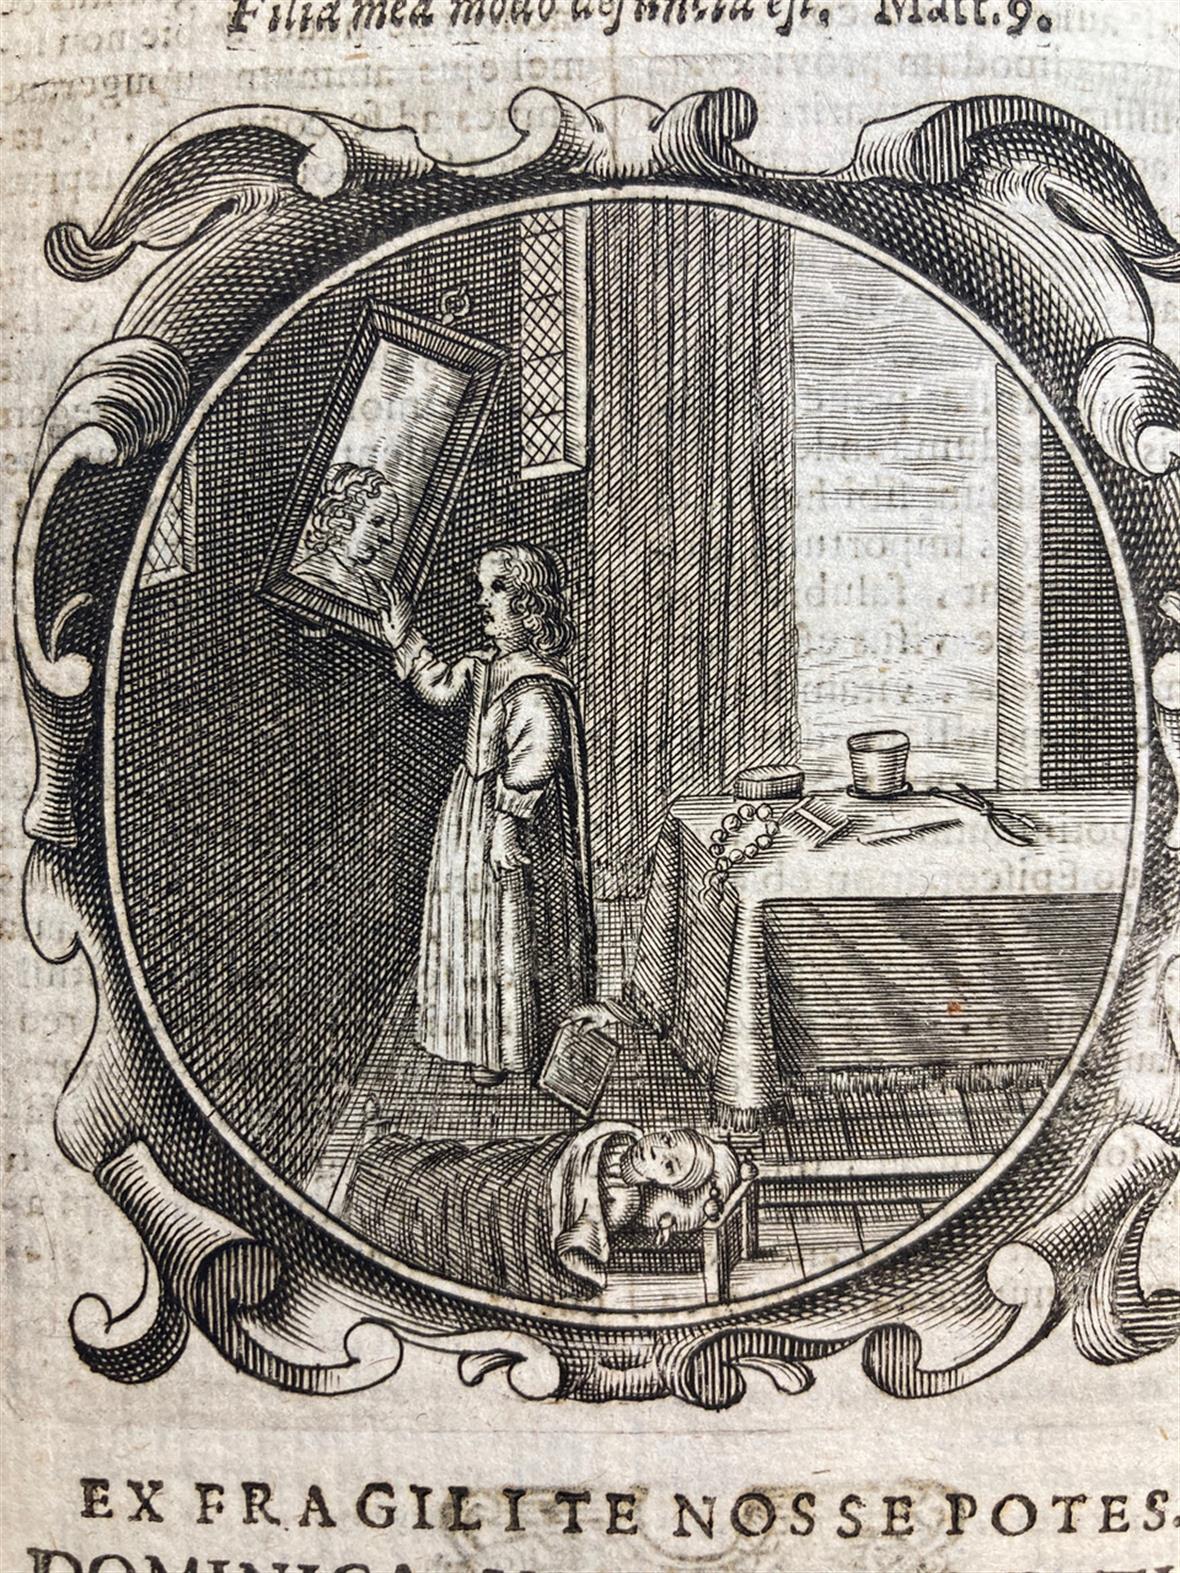 Detail of an engraiving from a book, showing a figure looking in a mirror; a baby lies in a bed nearby.